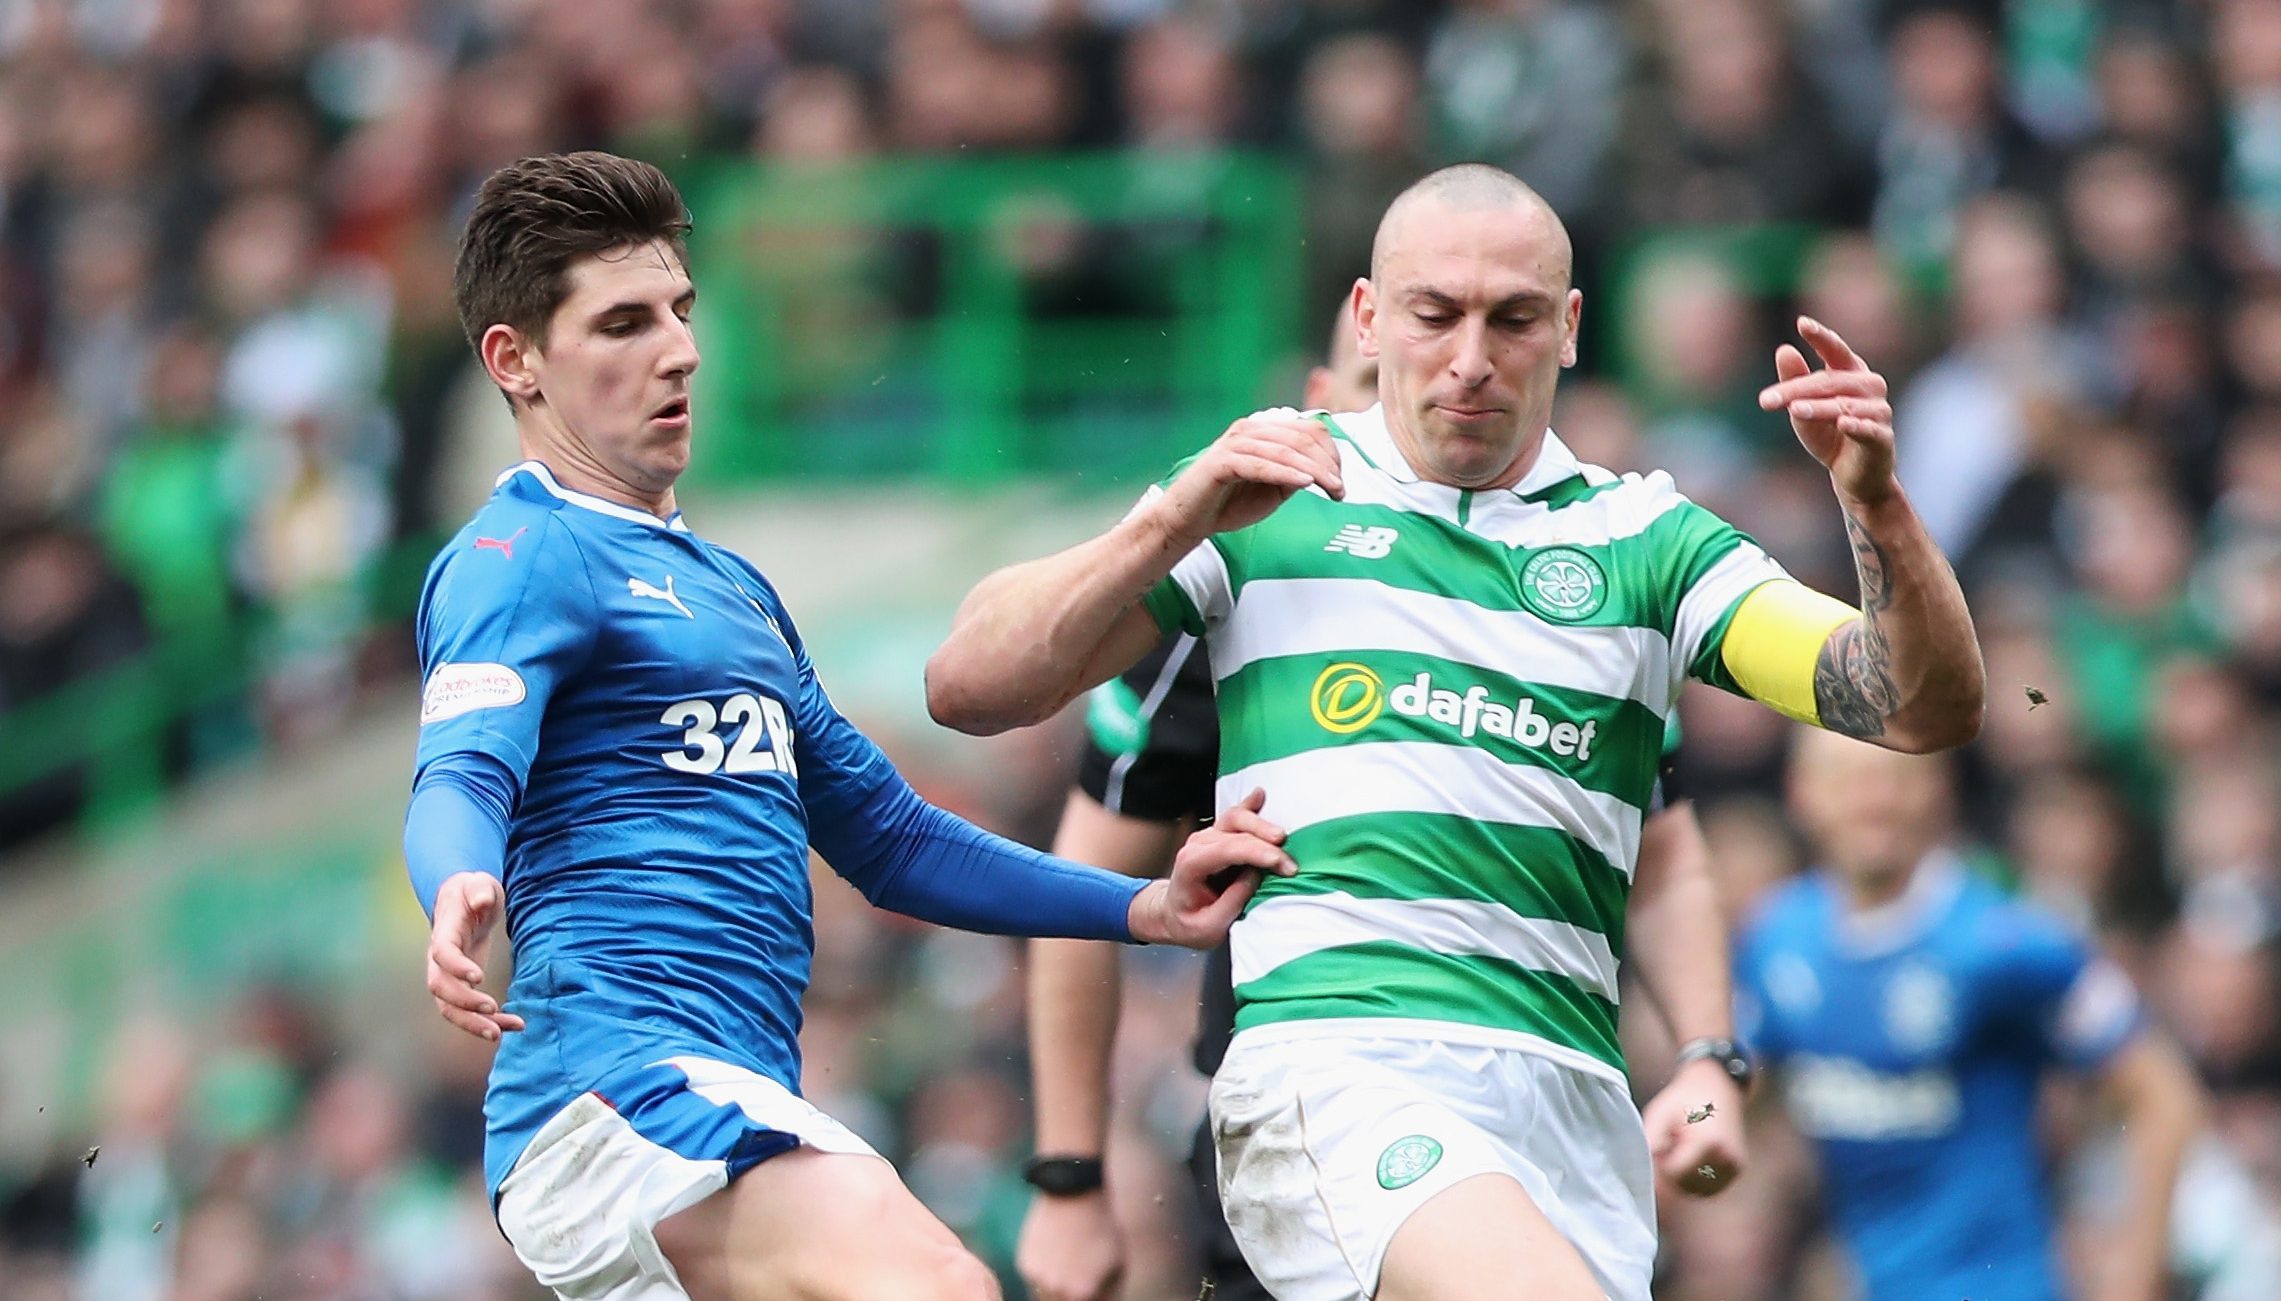 Emerson Hyndman of Rangers (L) and Scott Brown of Celtic (R) battle for possession (Ian MacNicol/Getty Images)